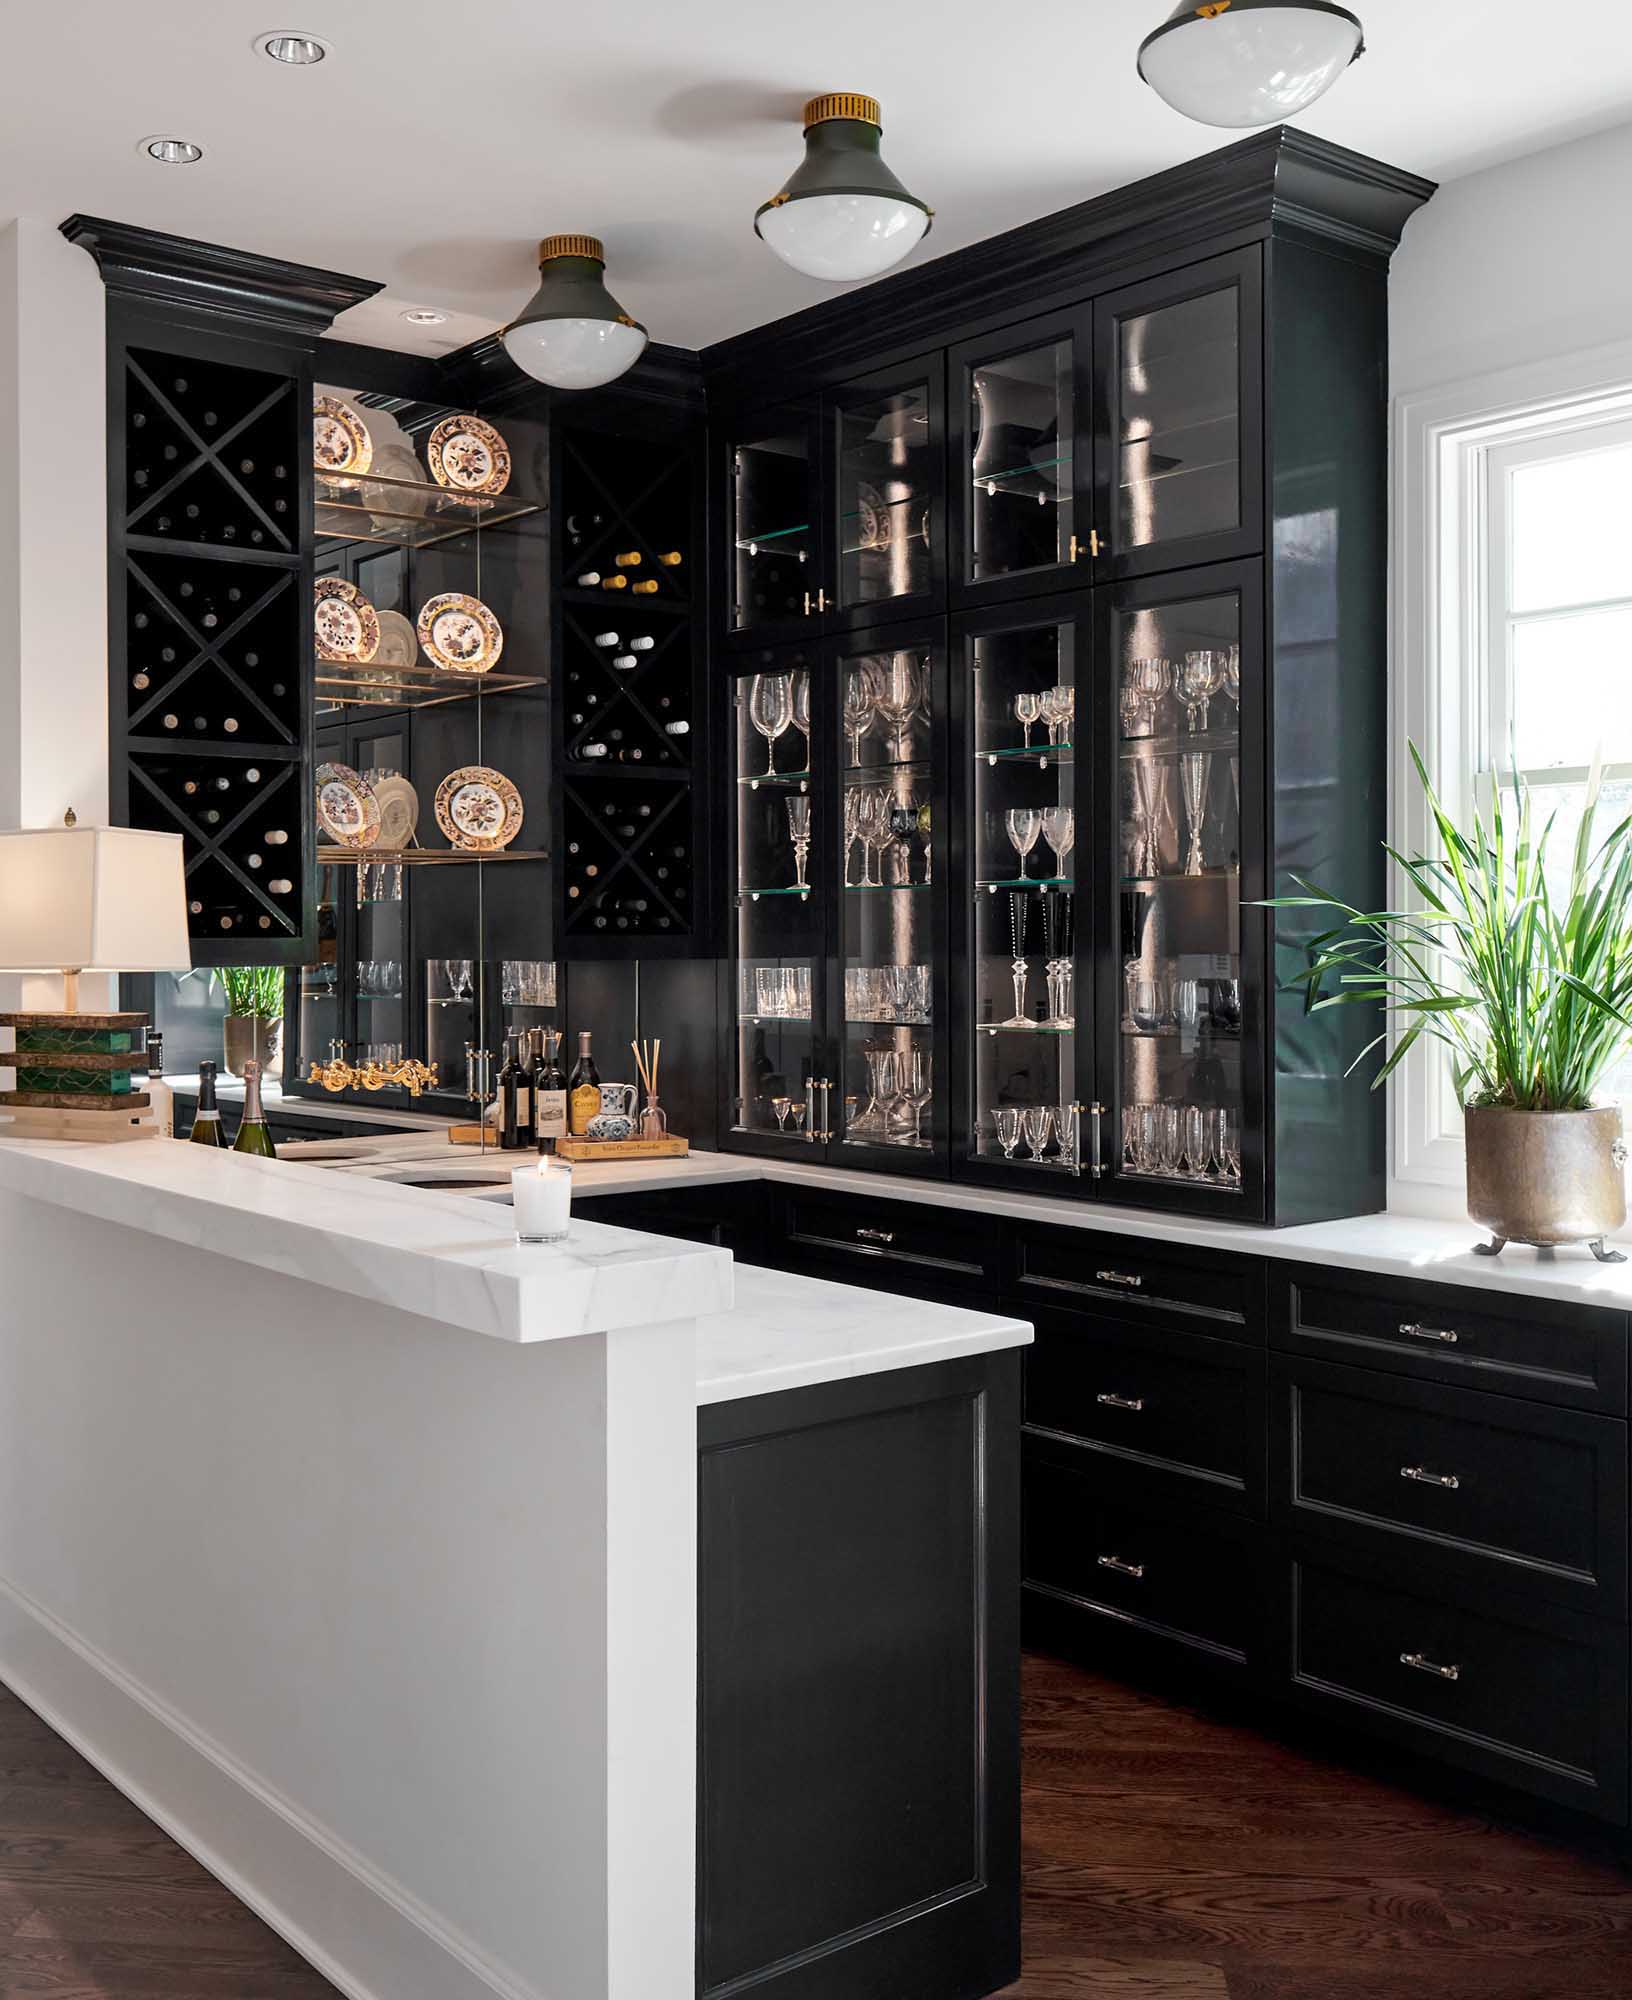 sherwin-williams-inkwell-6992-high-gloss-black-cabinet-paint-alamo-heights-tx-paper-moon-painting